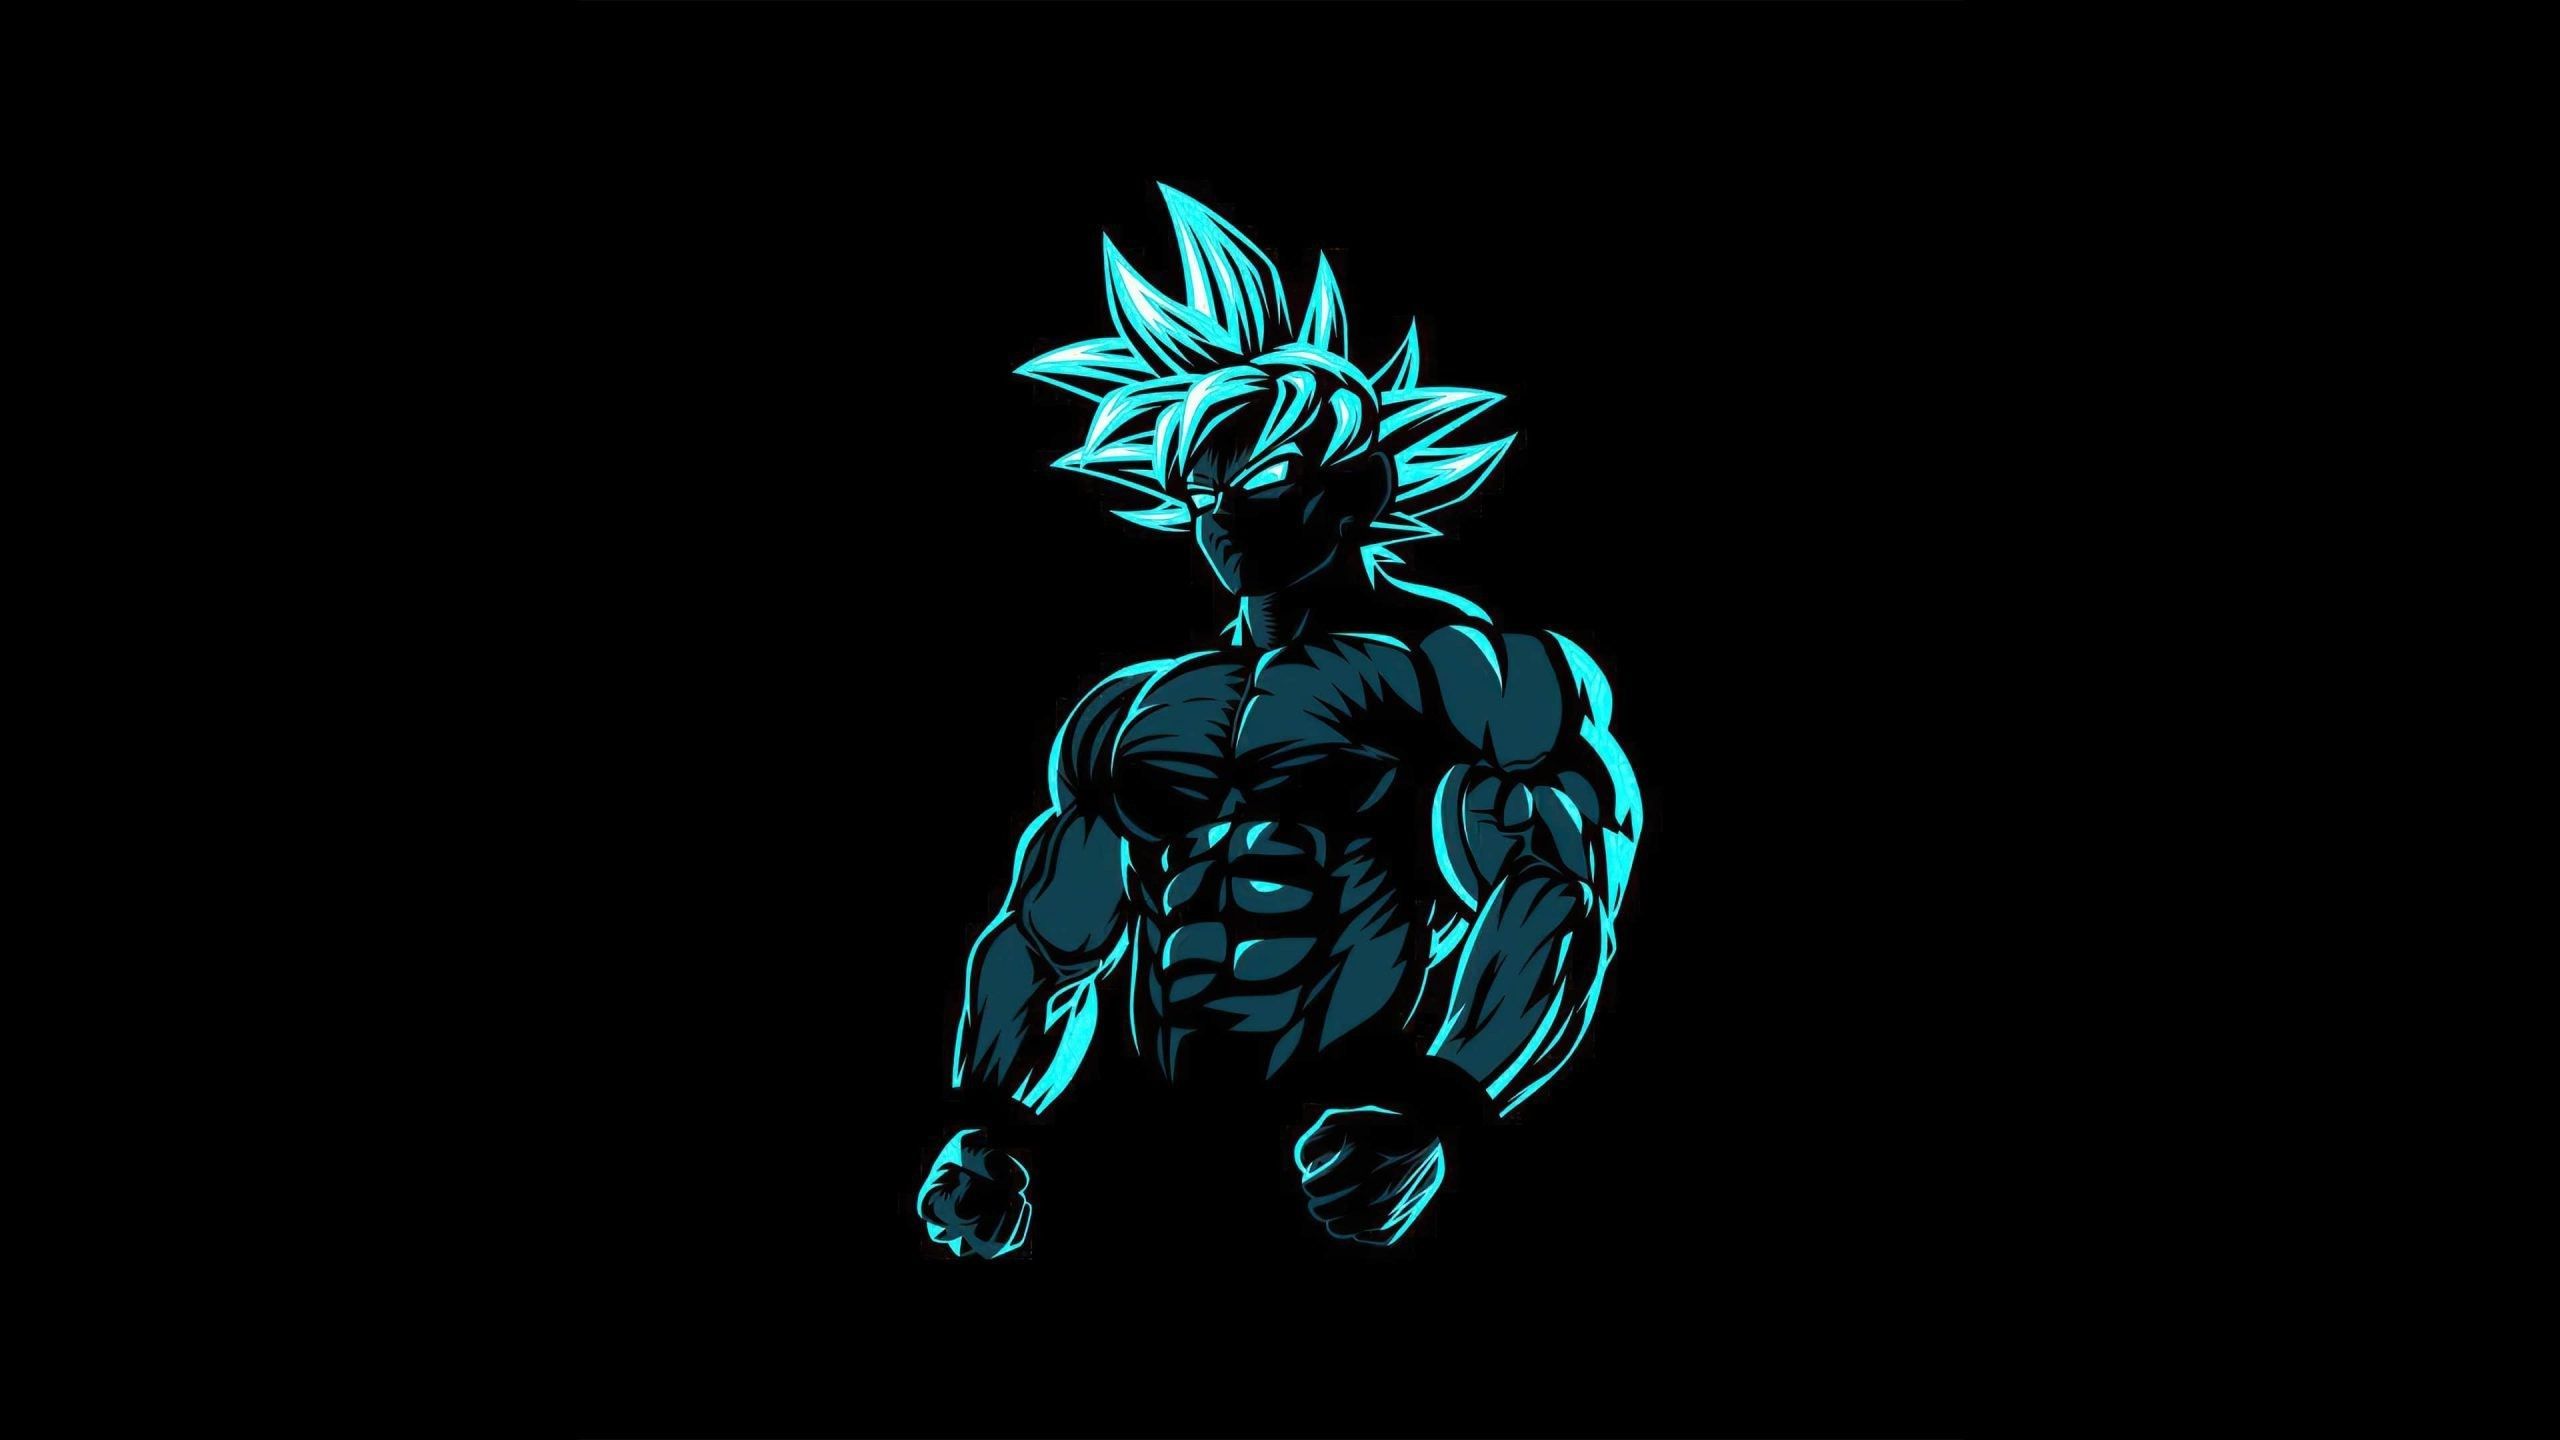 Goku ultra instinct wallpaper for mobile phone tablet desktop puter and other devices hd and â goku wallpaper beast wallpaper goku ultra instinct wallpaper